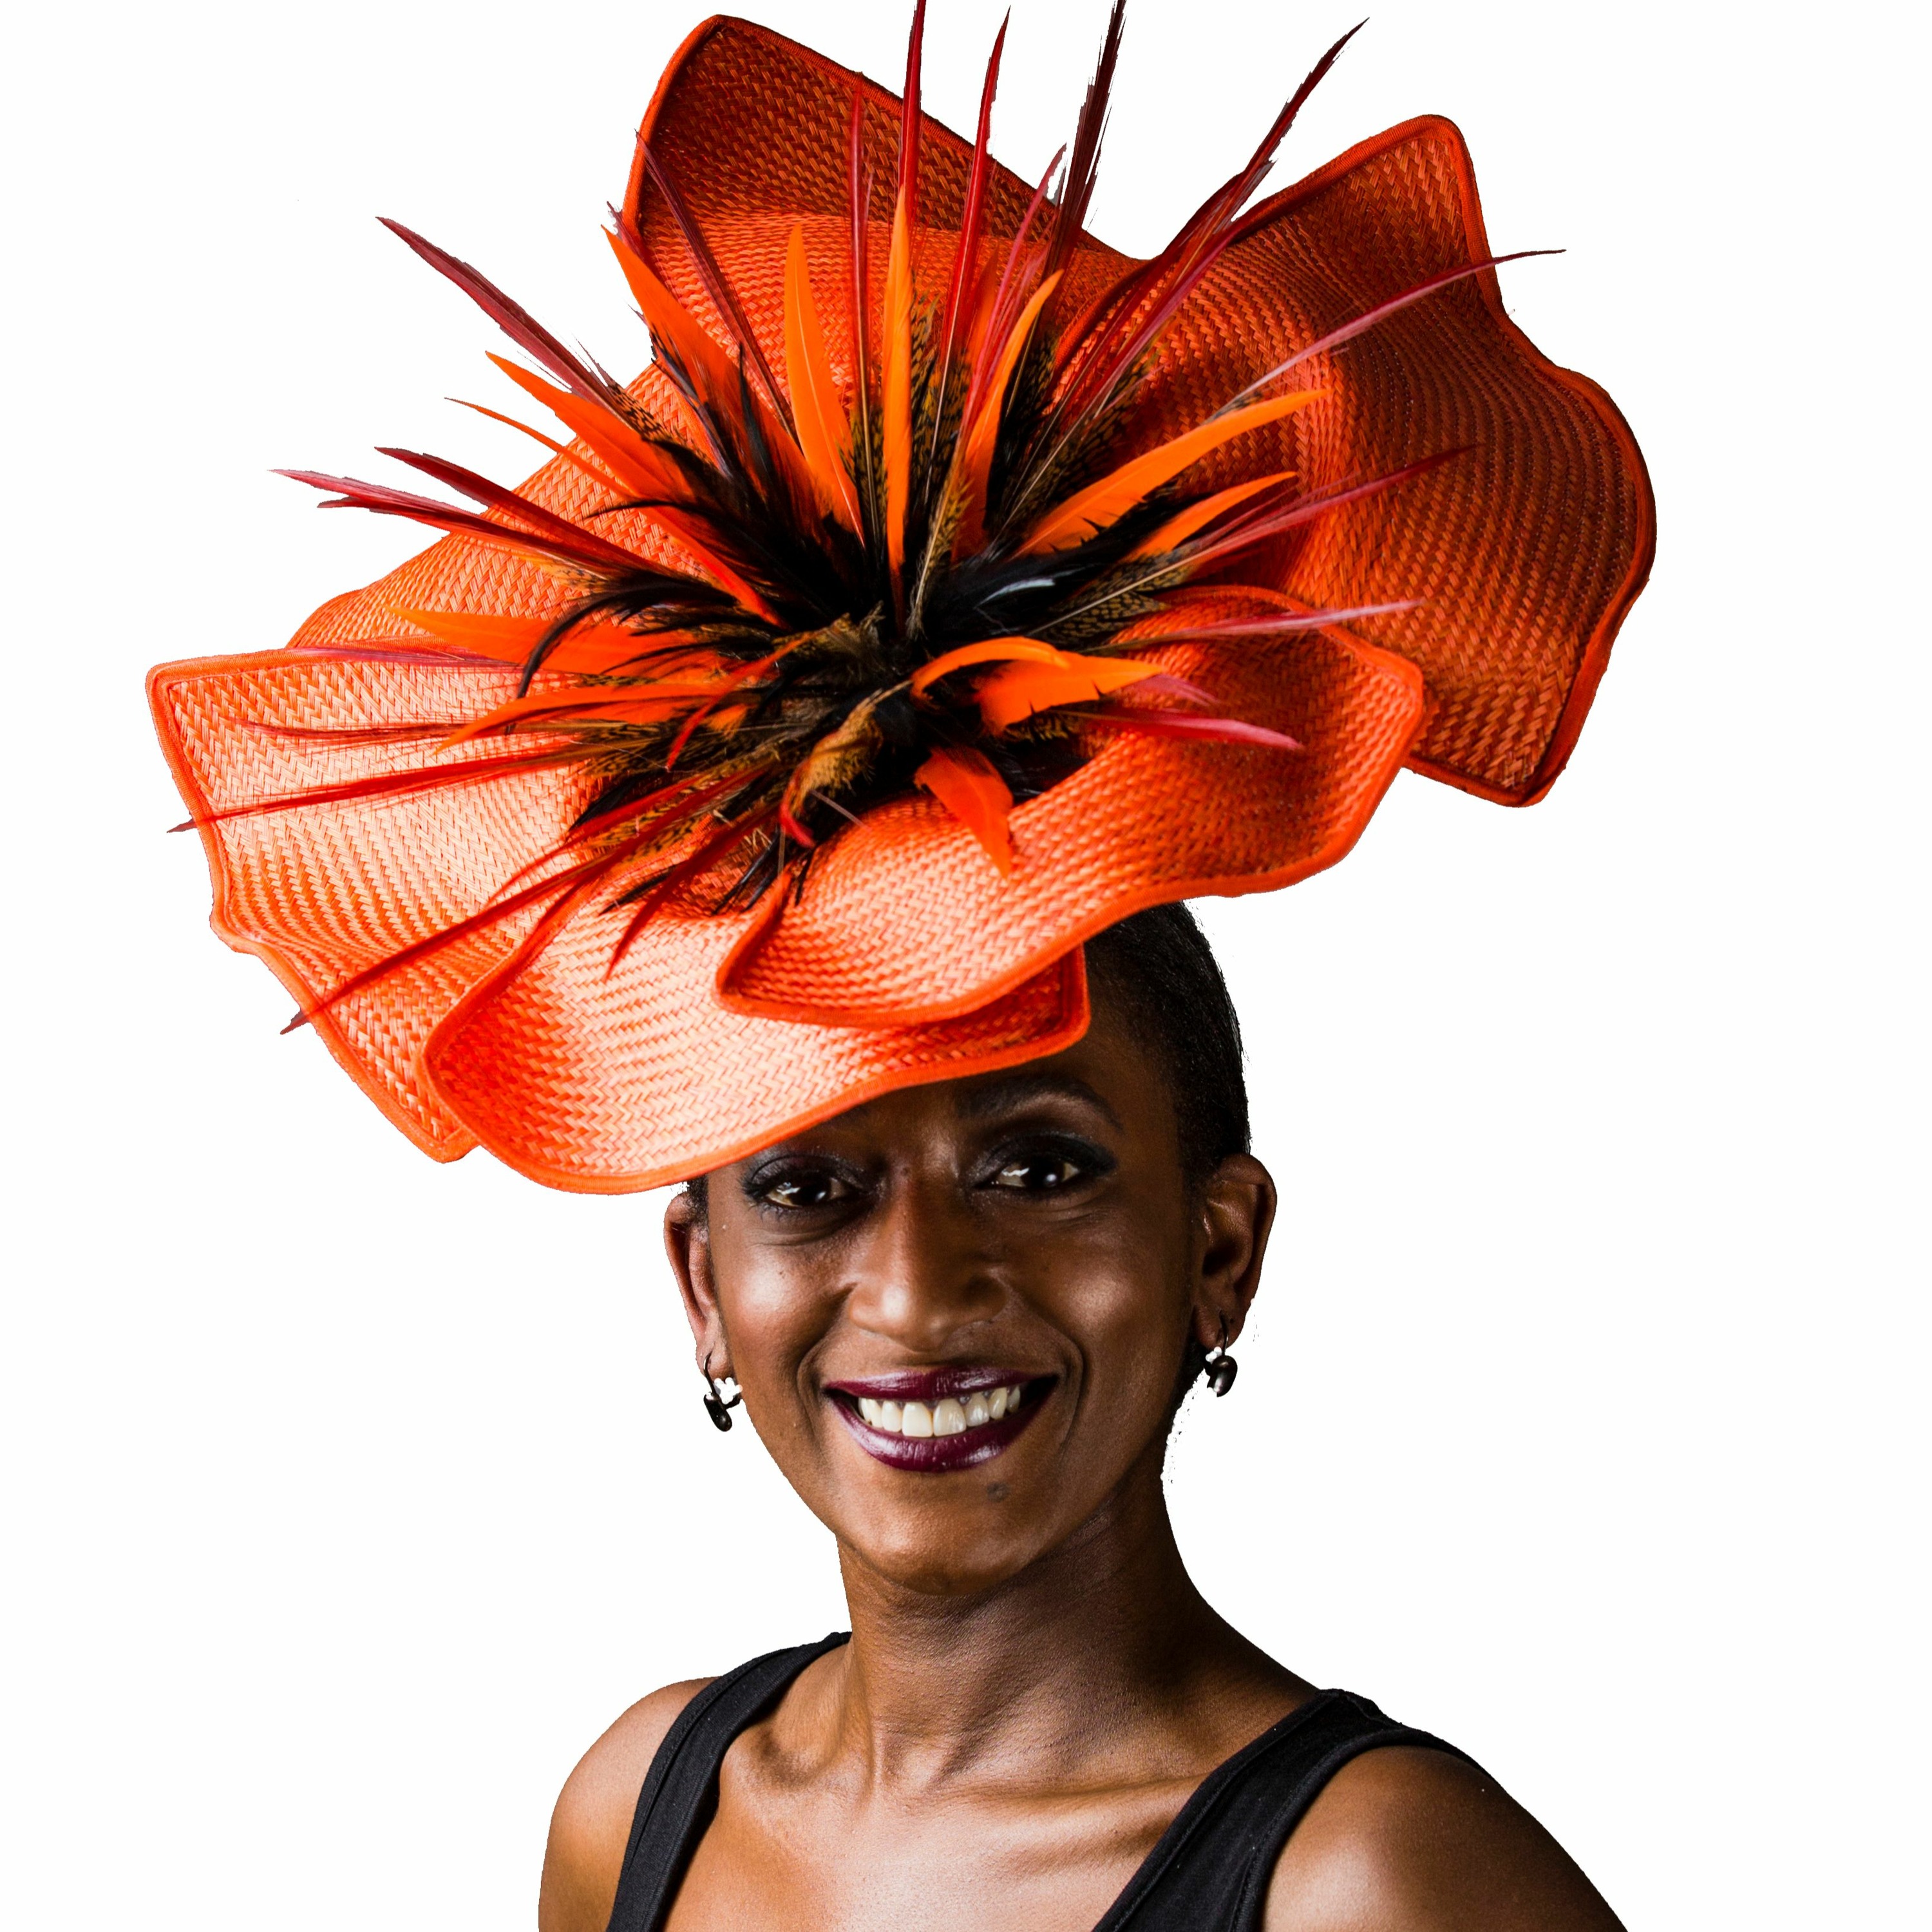 Hats Off to Adelaide Millinery Convention